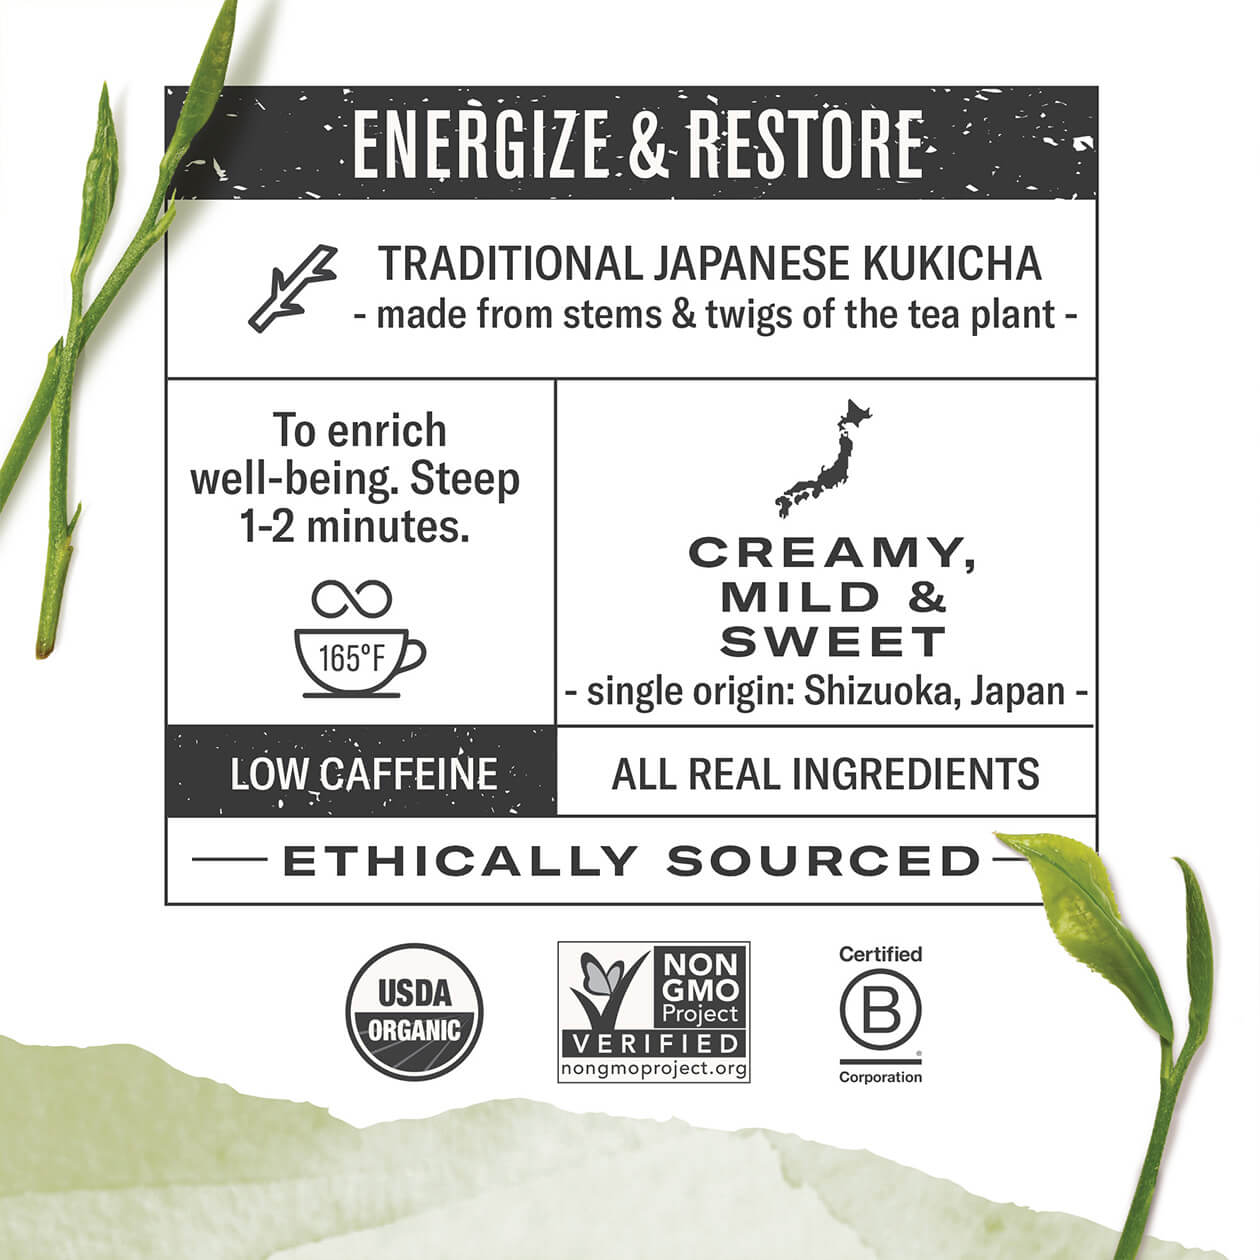 Infographic about Kukicha: steep 1-2 minutes, origin: Shizouka Japan, low caffeine, all real ingredients, ethically sourced